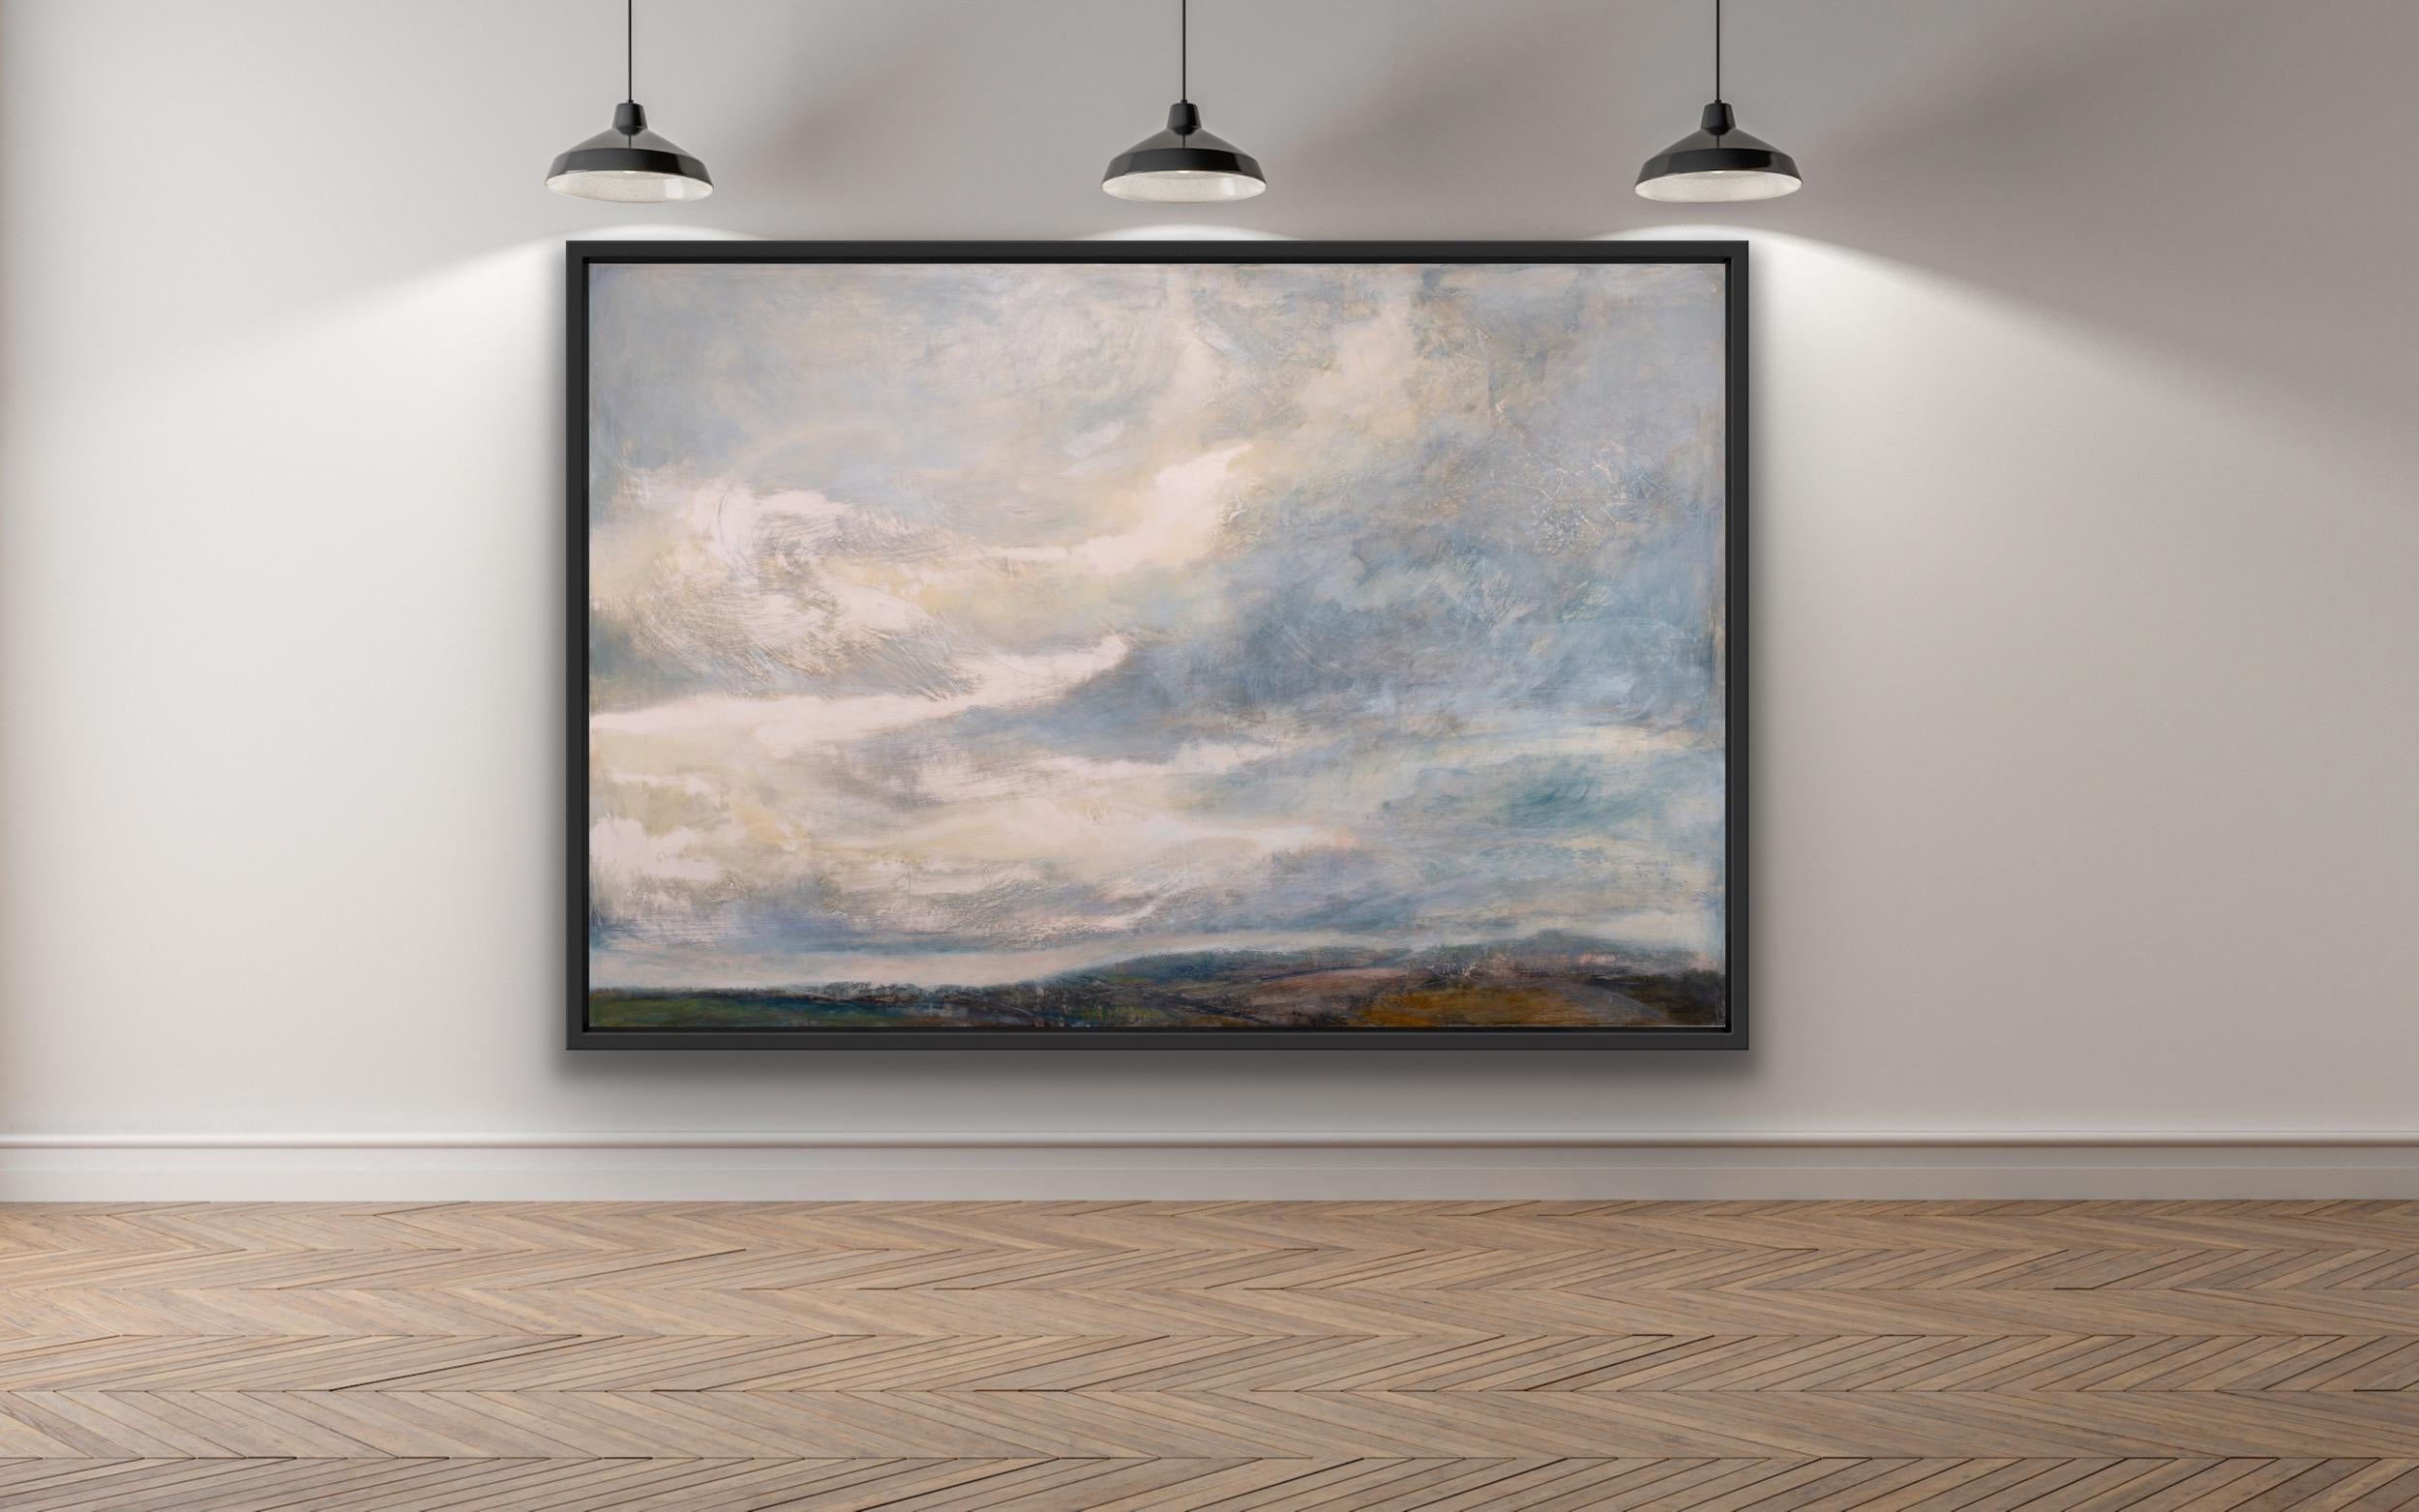 Created in early 2020, this painting captures the bleached wild skies of late winter, whilst the earth is beginning to think about spring. The painting feels like a breath of fresh air, of wind and soft colours. The painted surface is both engraved